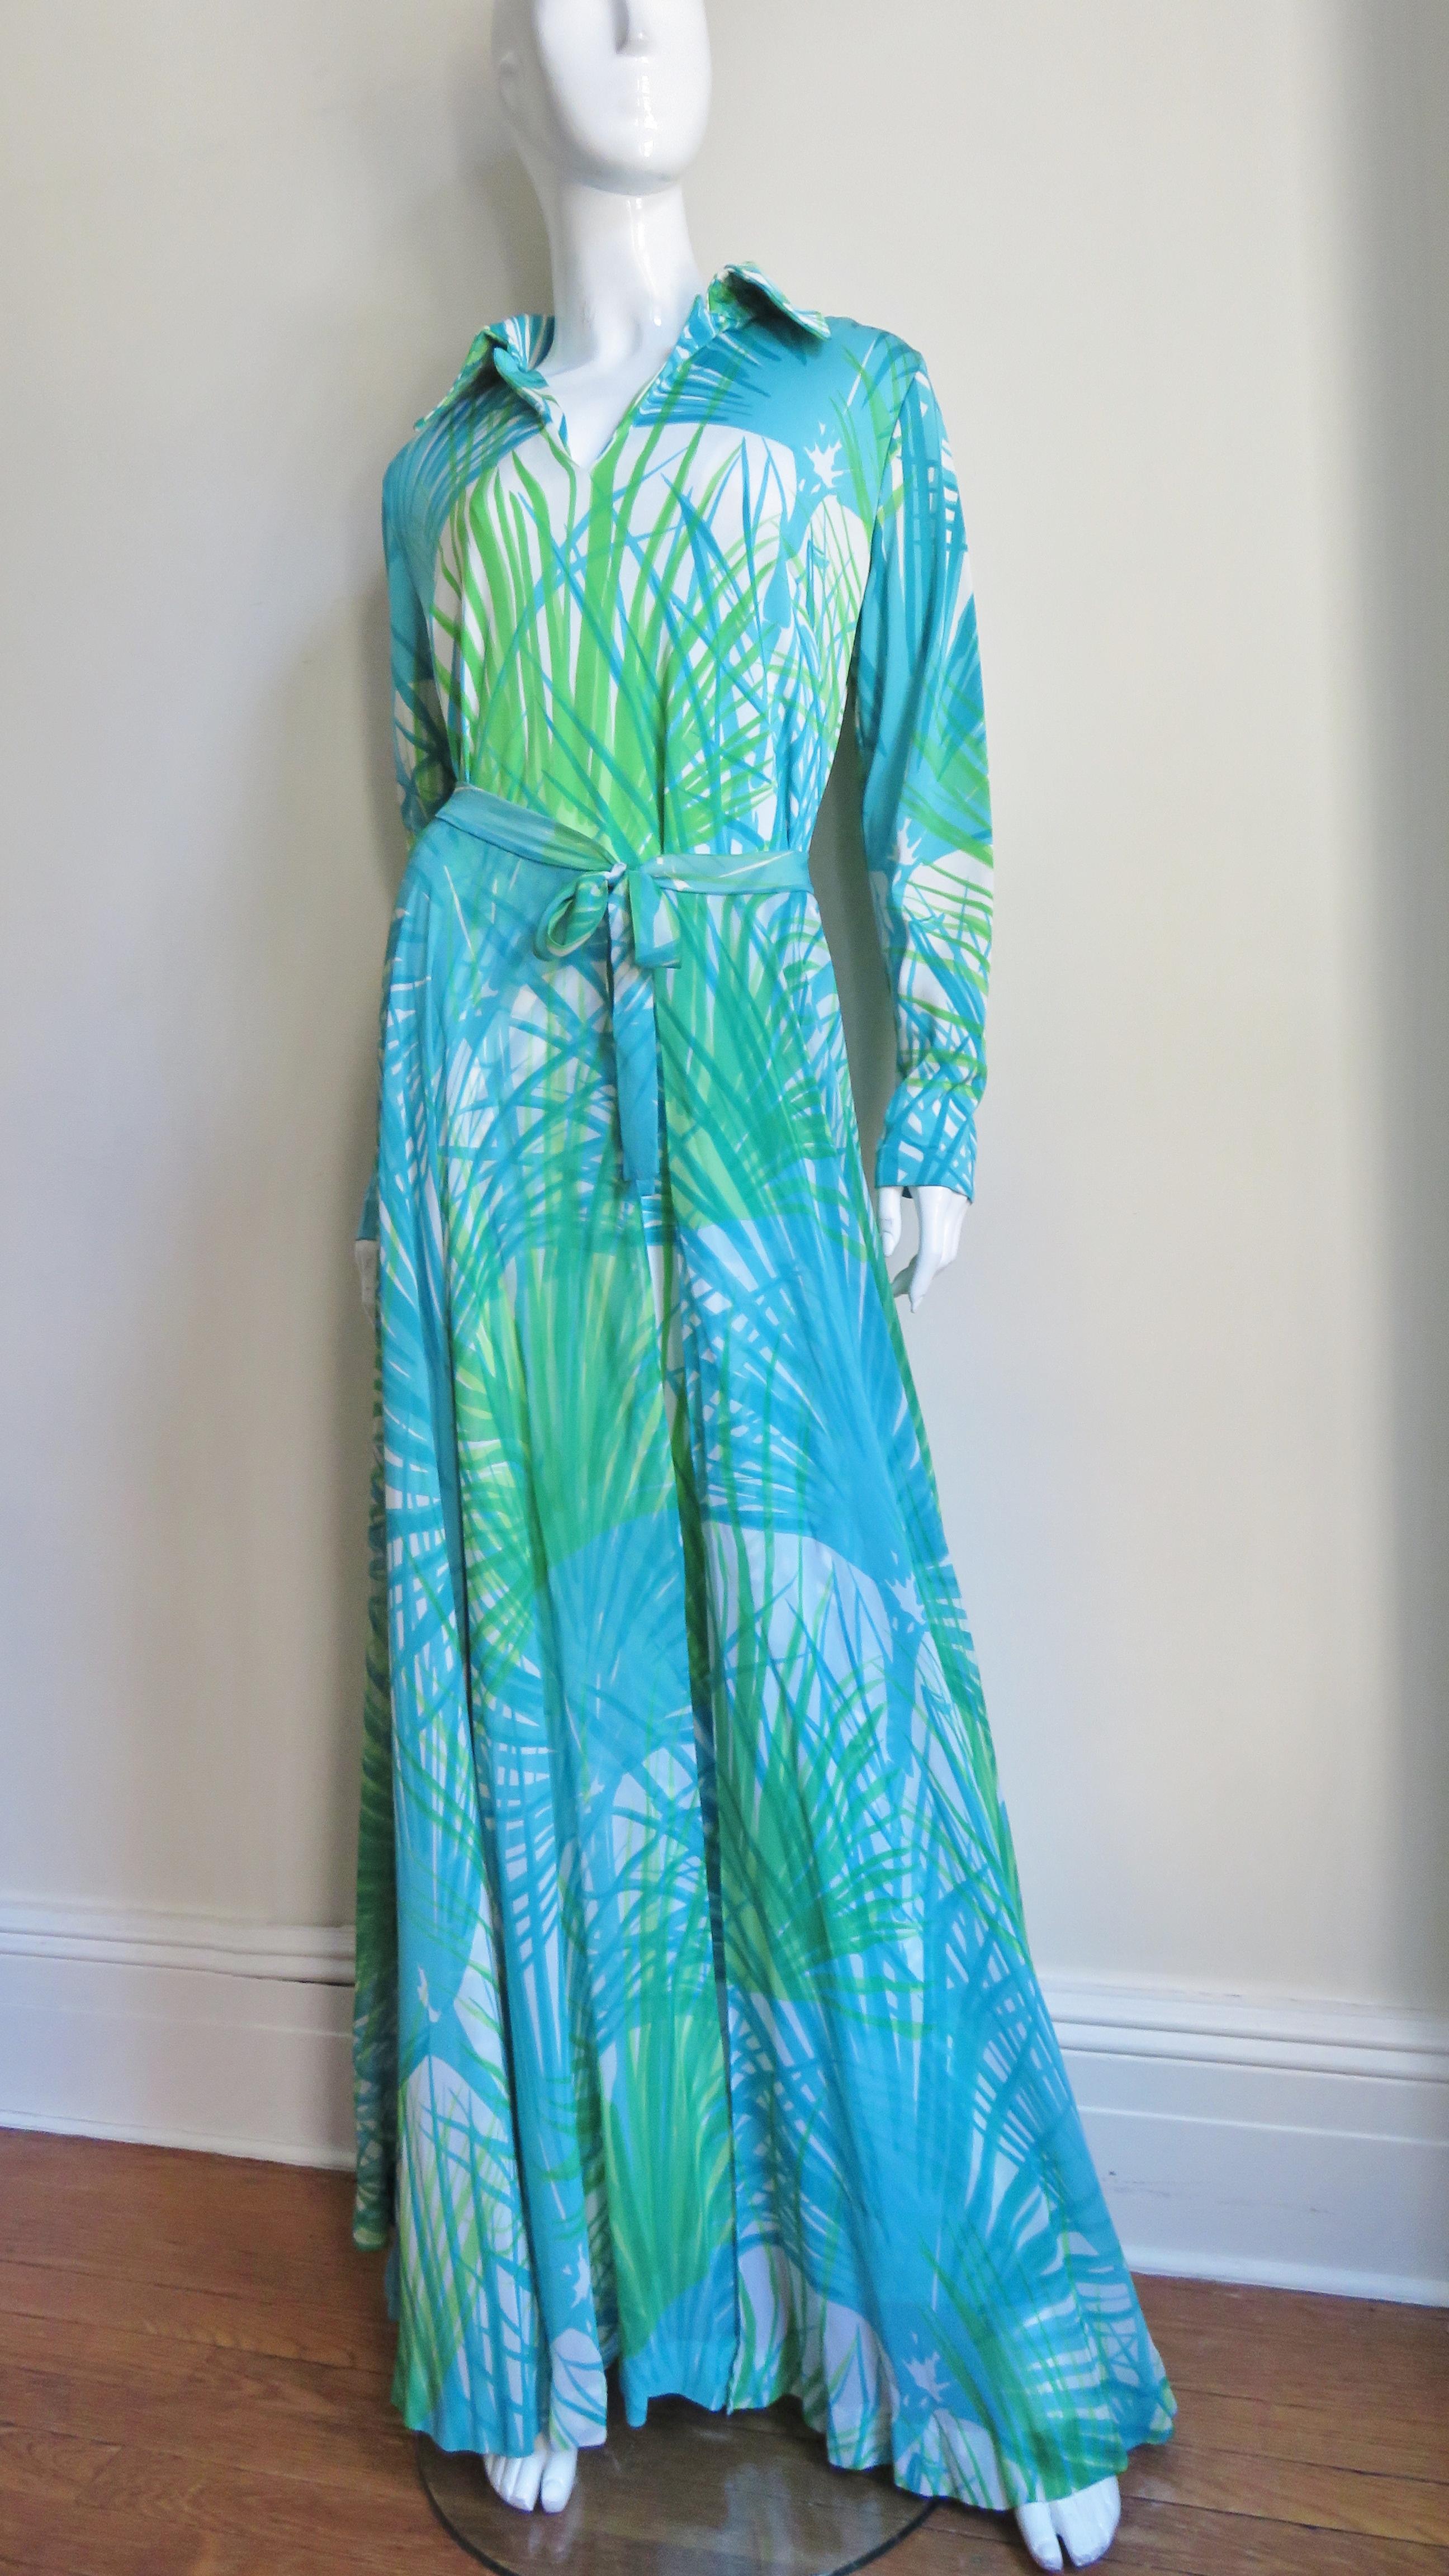 A fabulous three piece jersey and silk set in a blue and green abstract fern print from La Mendola consisting of a maxi dress, tie belt and matching semi sheer silk over skirt. The dress has a collar V neckline, 5 self covered buttons at the wrists